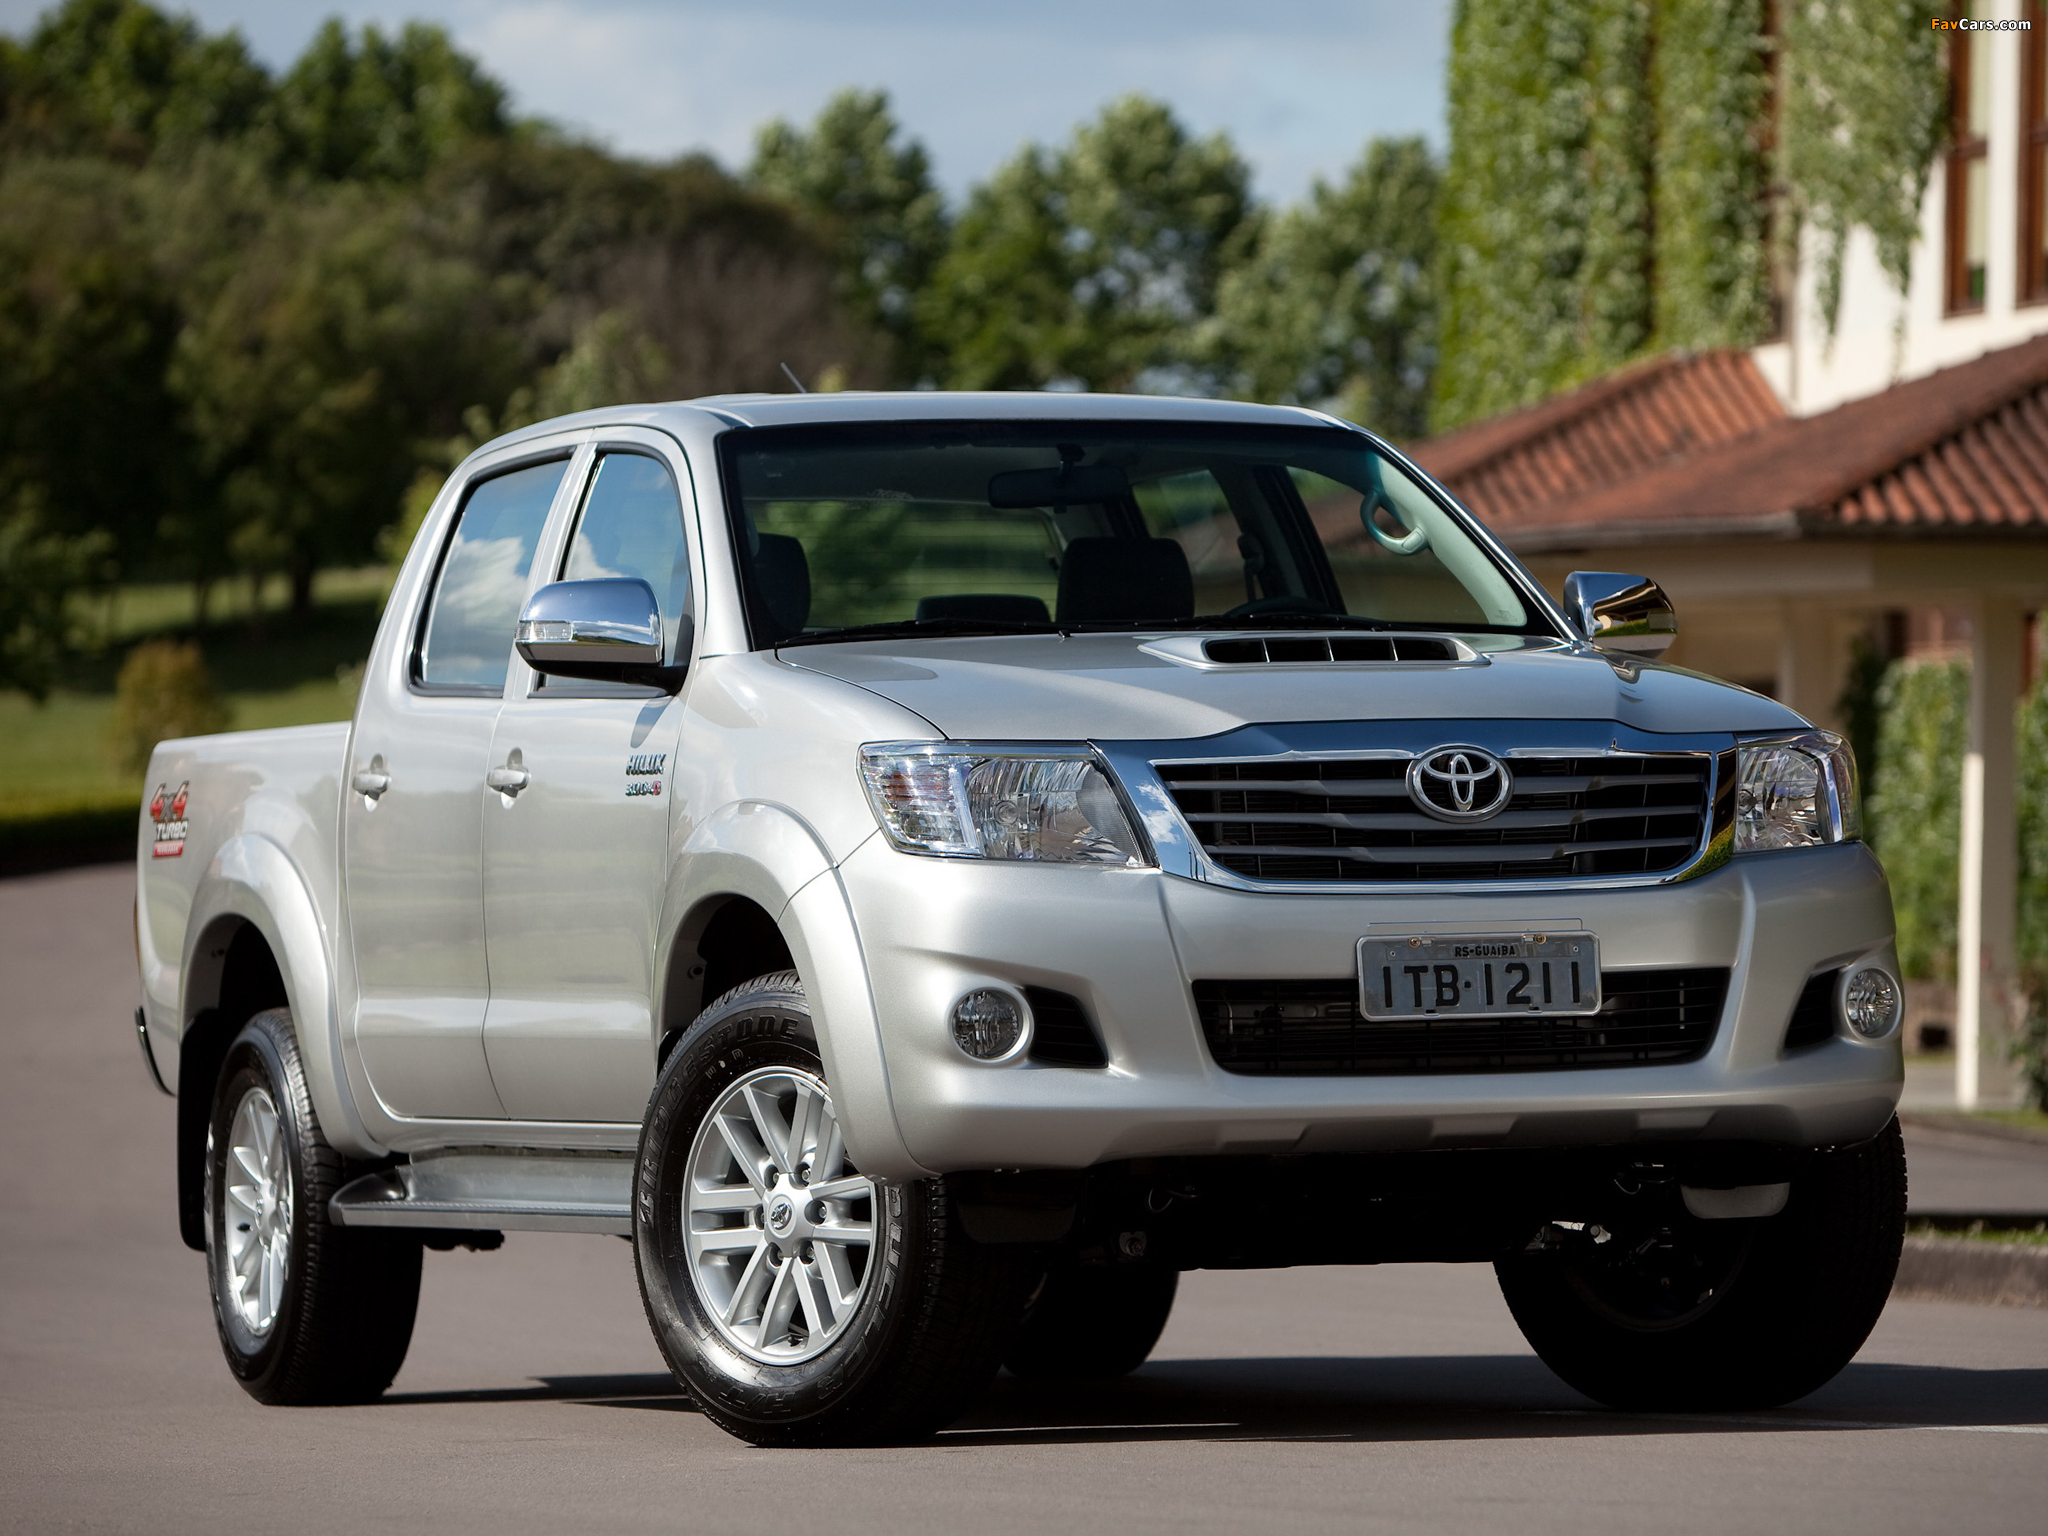 Toyota Hilux SRV Cabine Dupla 4x4 2012 pictures (2048 x 1536)